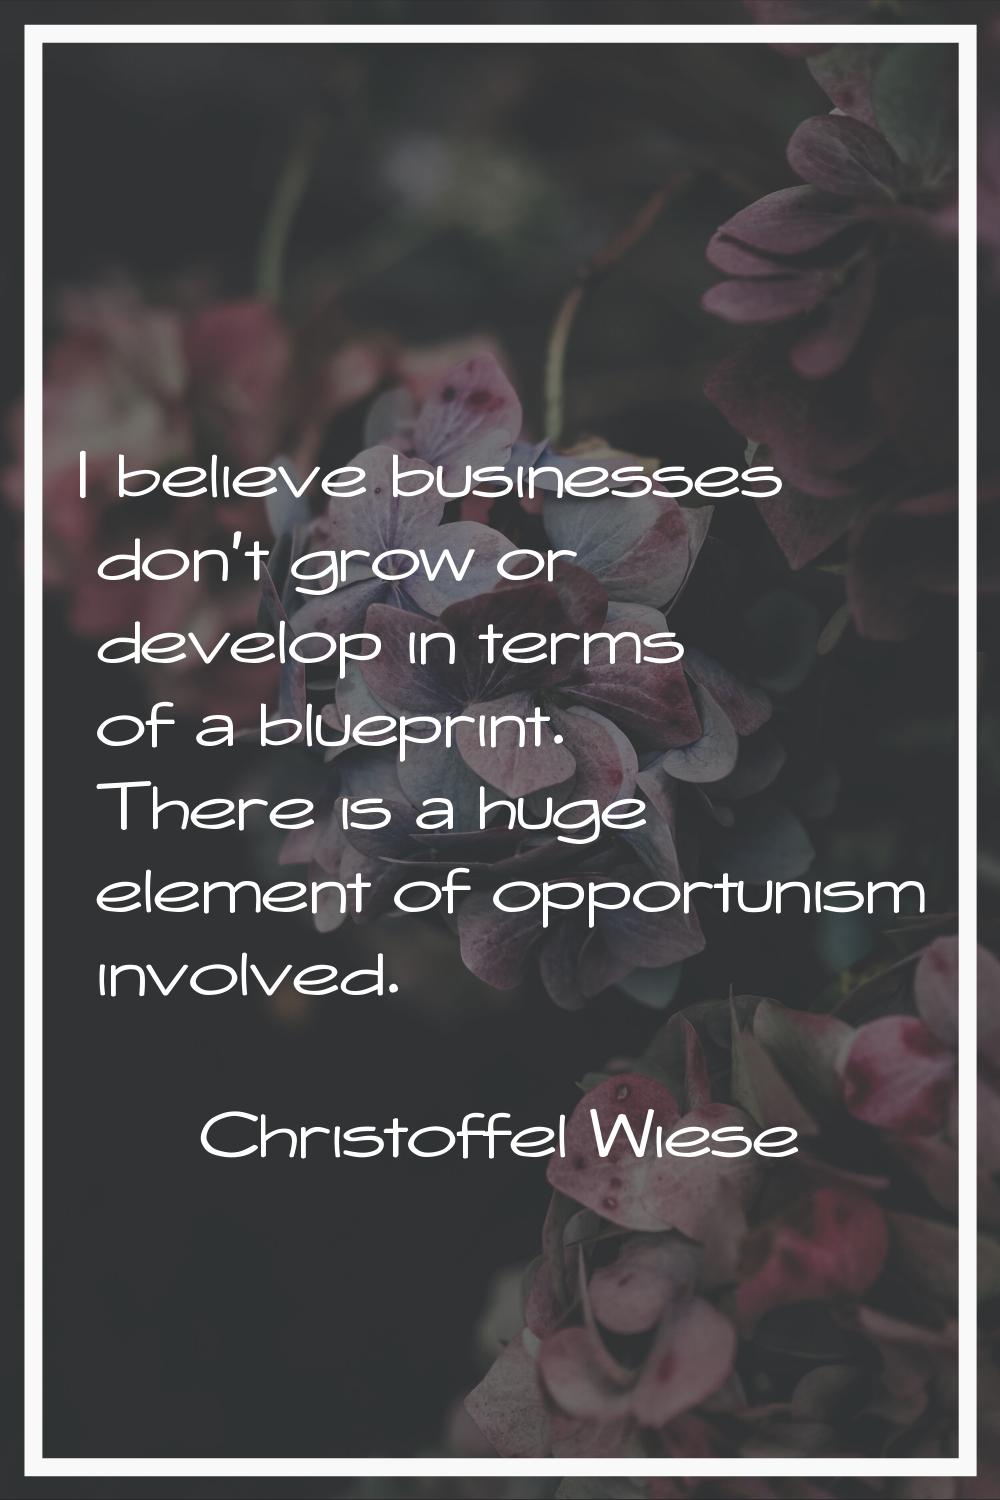 I believe businesses don't grow or develop in terms of a blueprint. There is a huge element of oppo